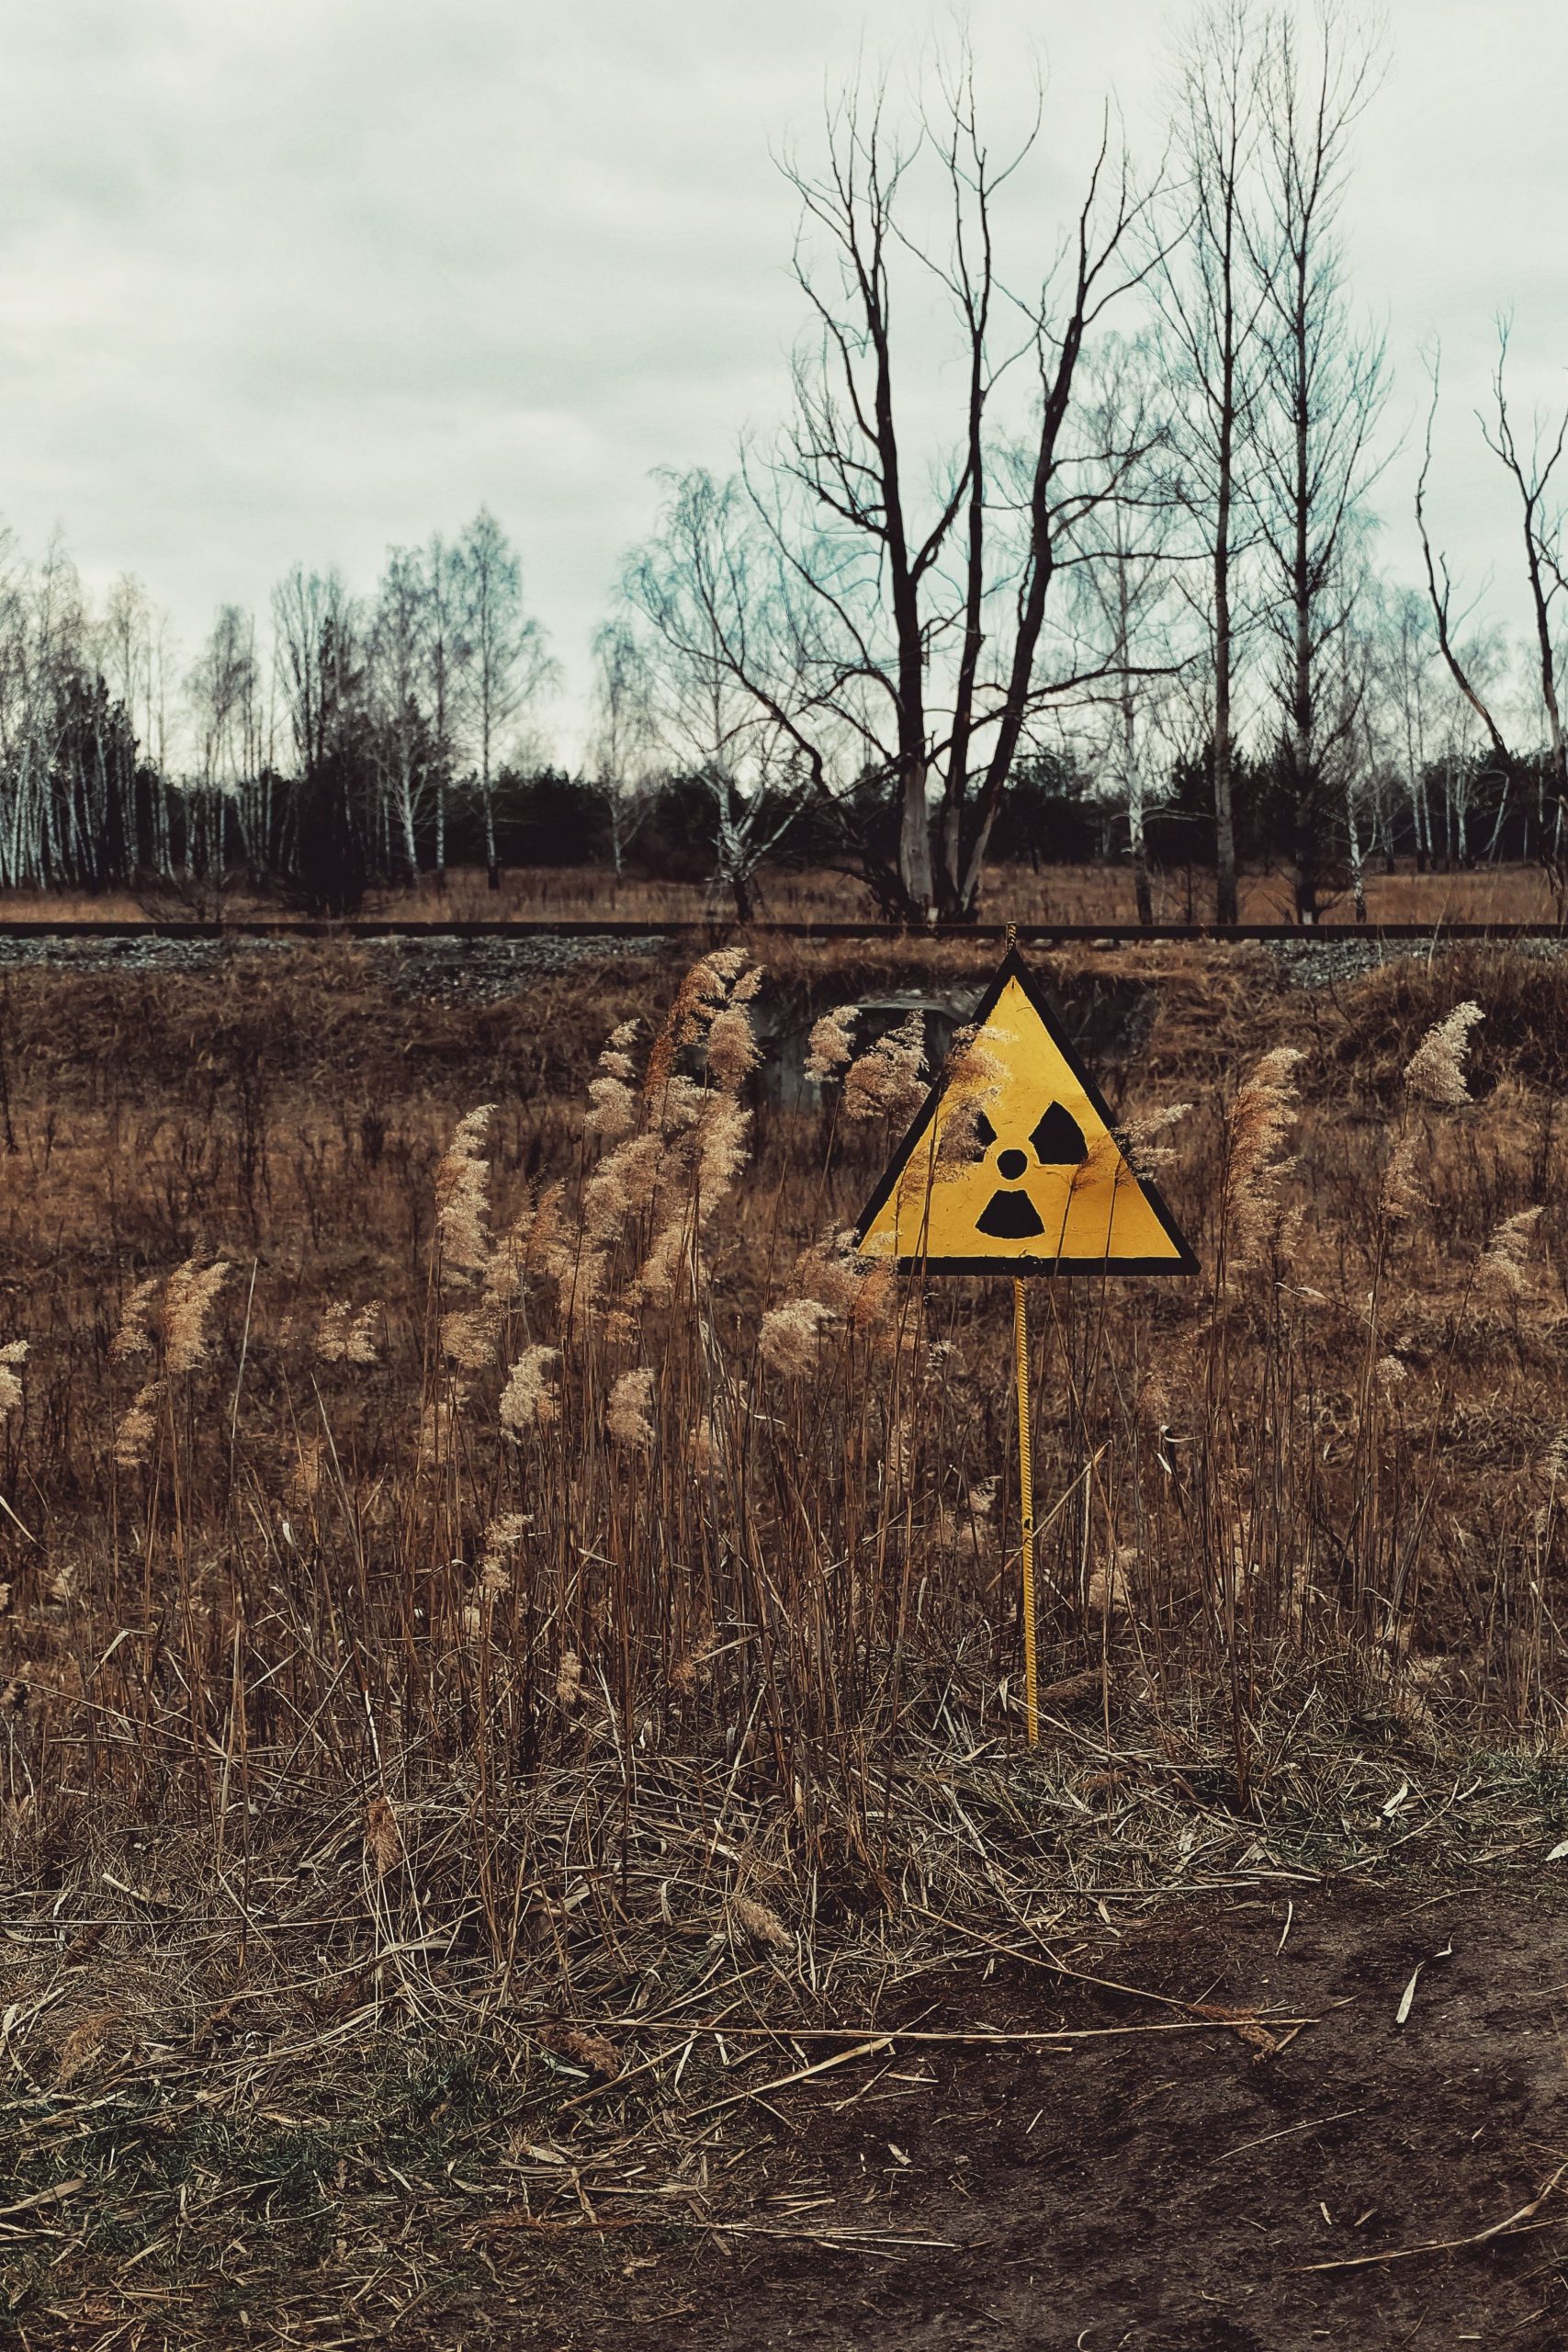 Russian forces attack Chernobyl, ‘ecological disaster’ could be on the cards